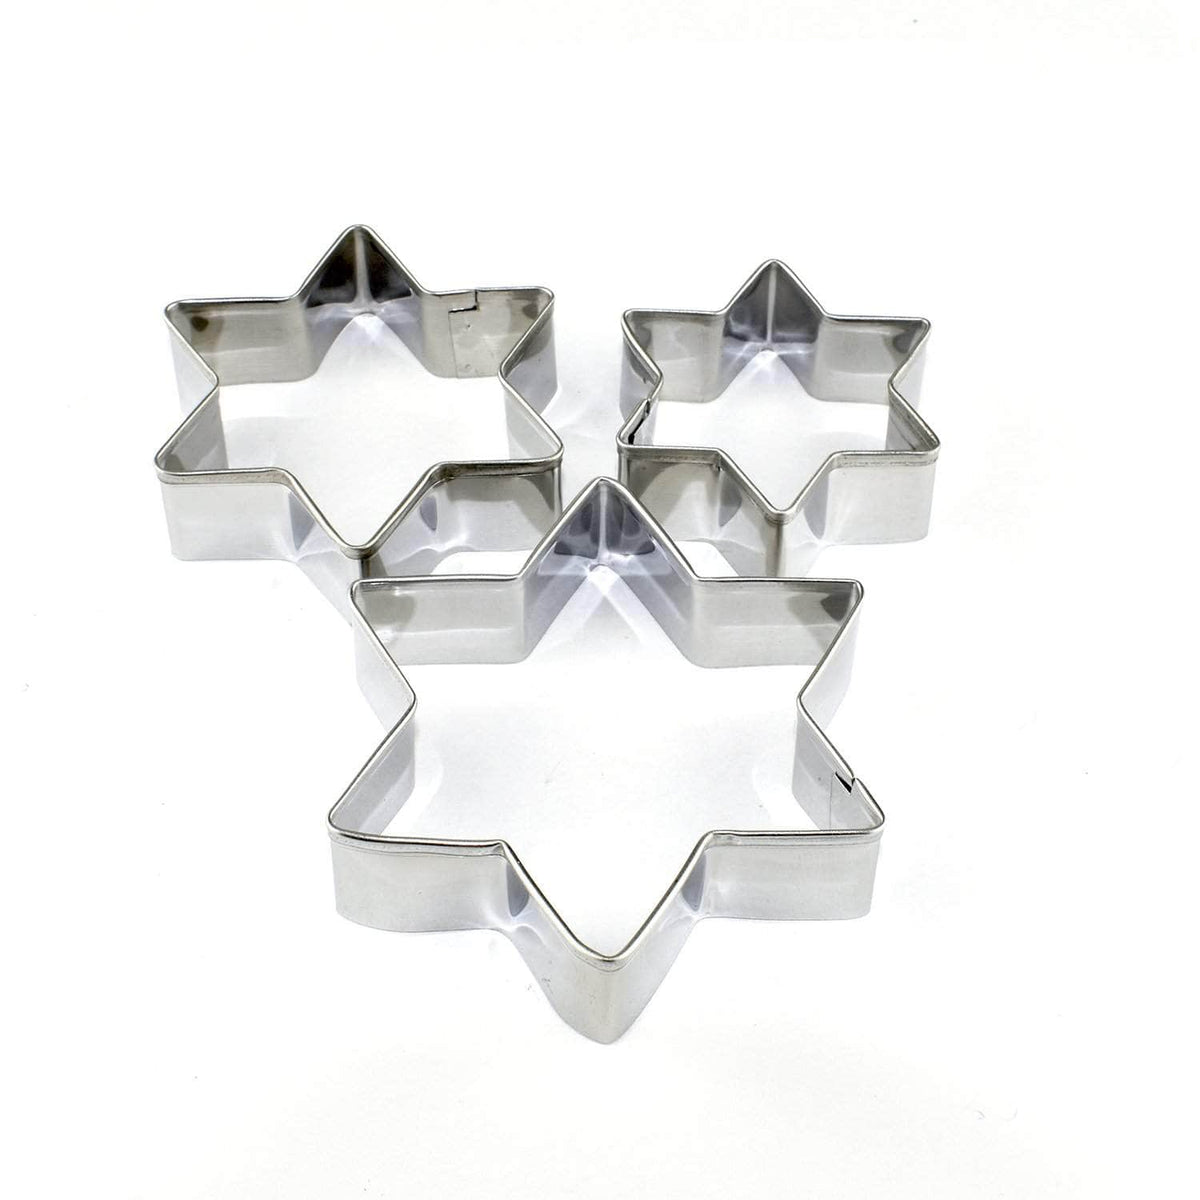 *New* Star biscuit cutters, set of 3